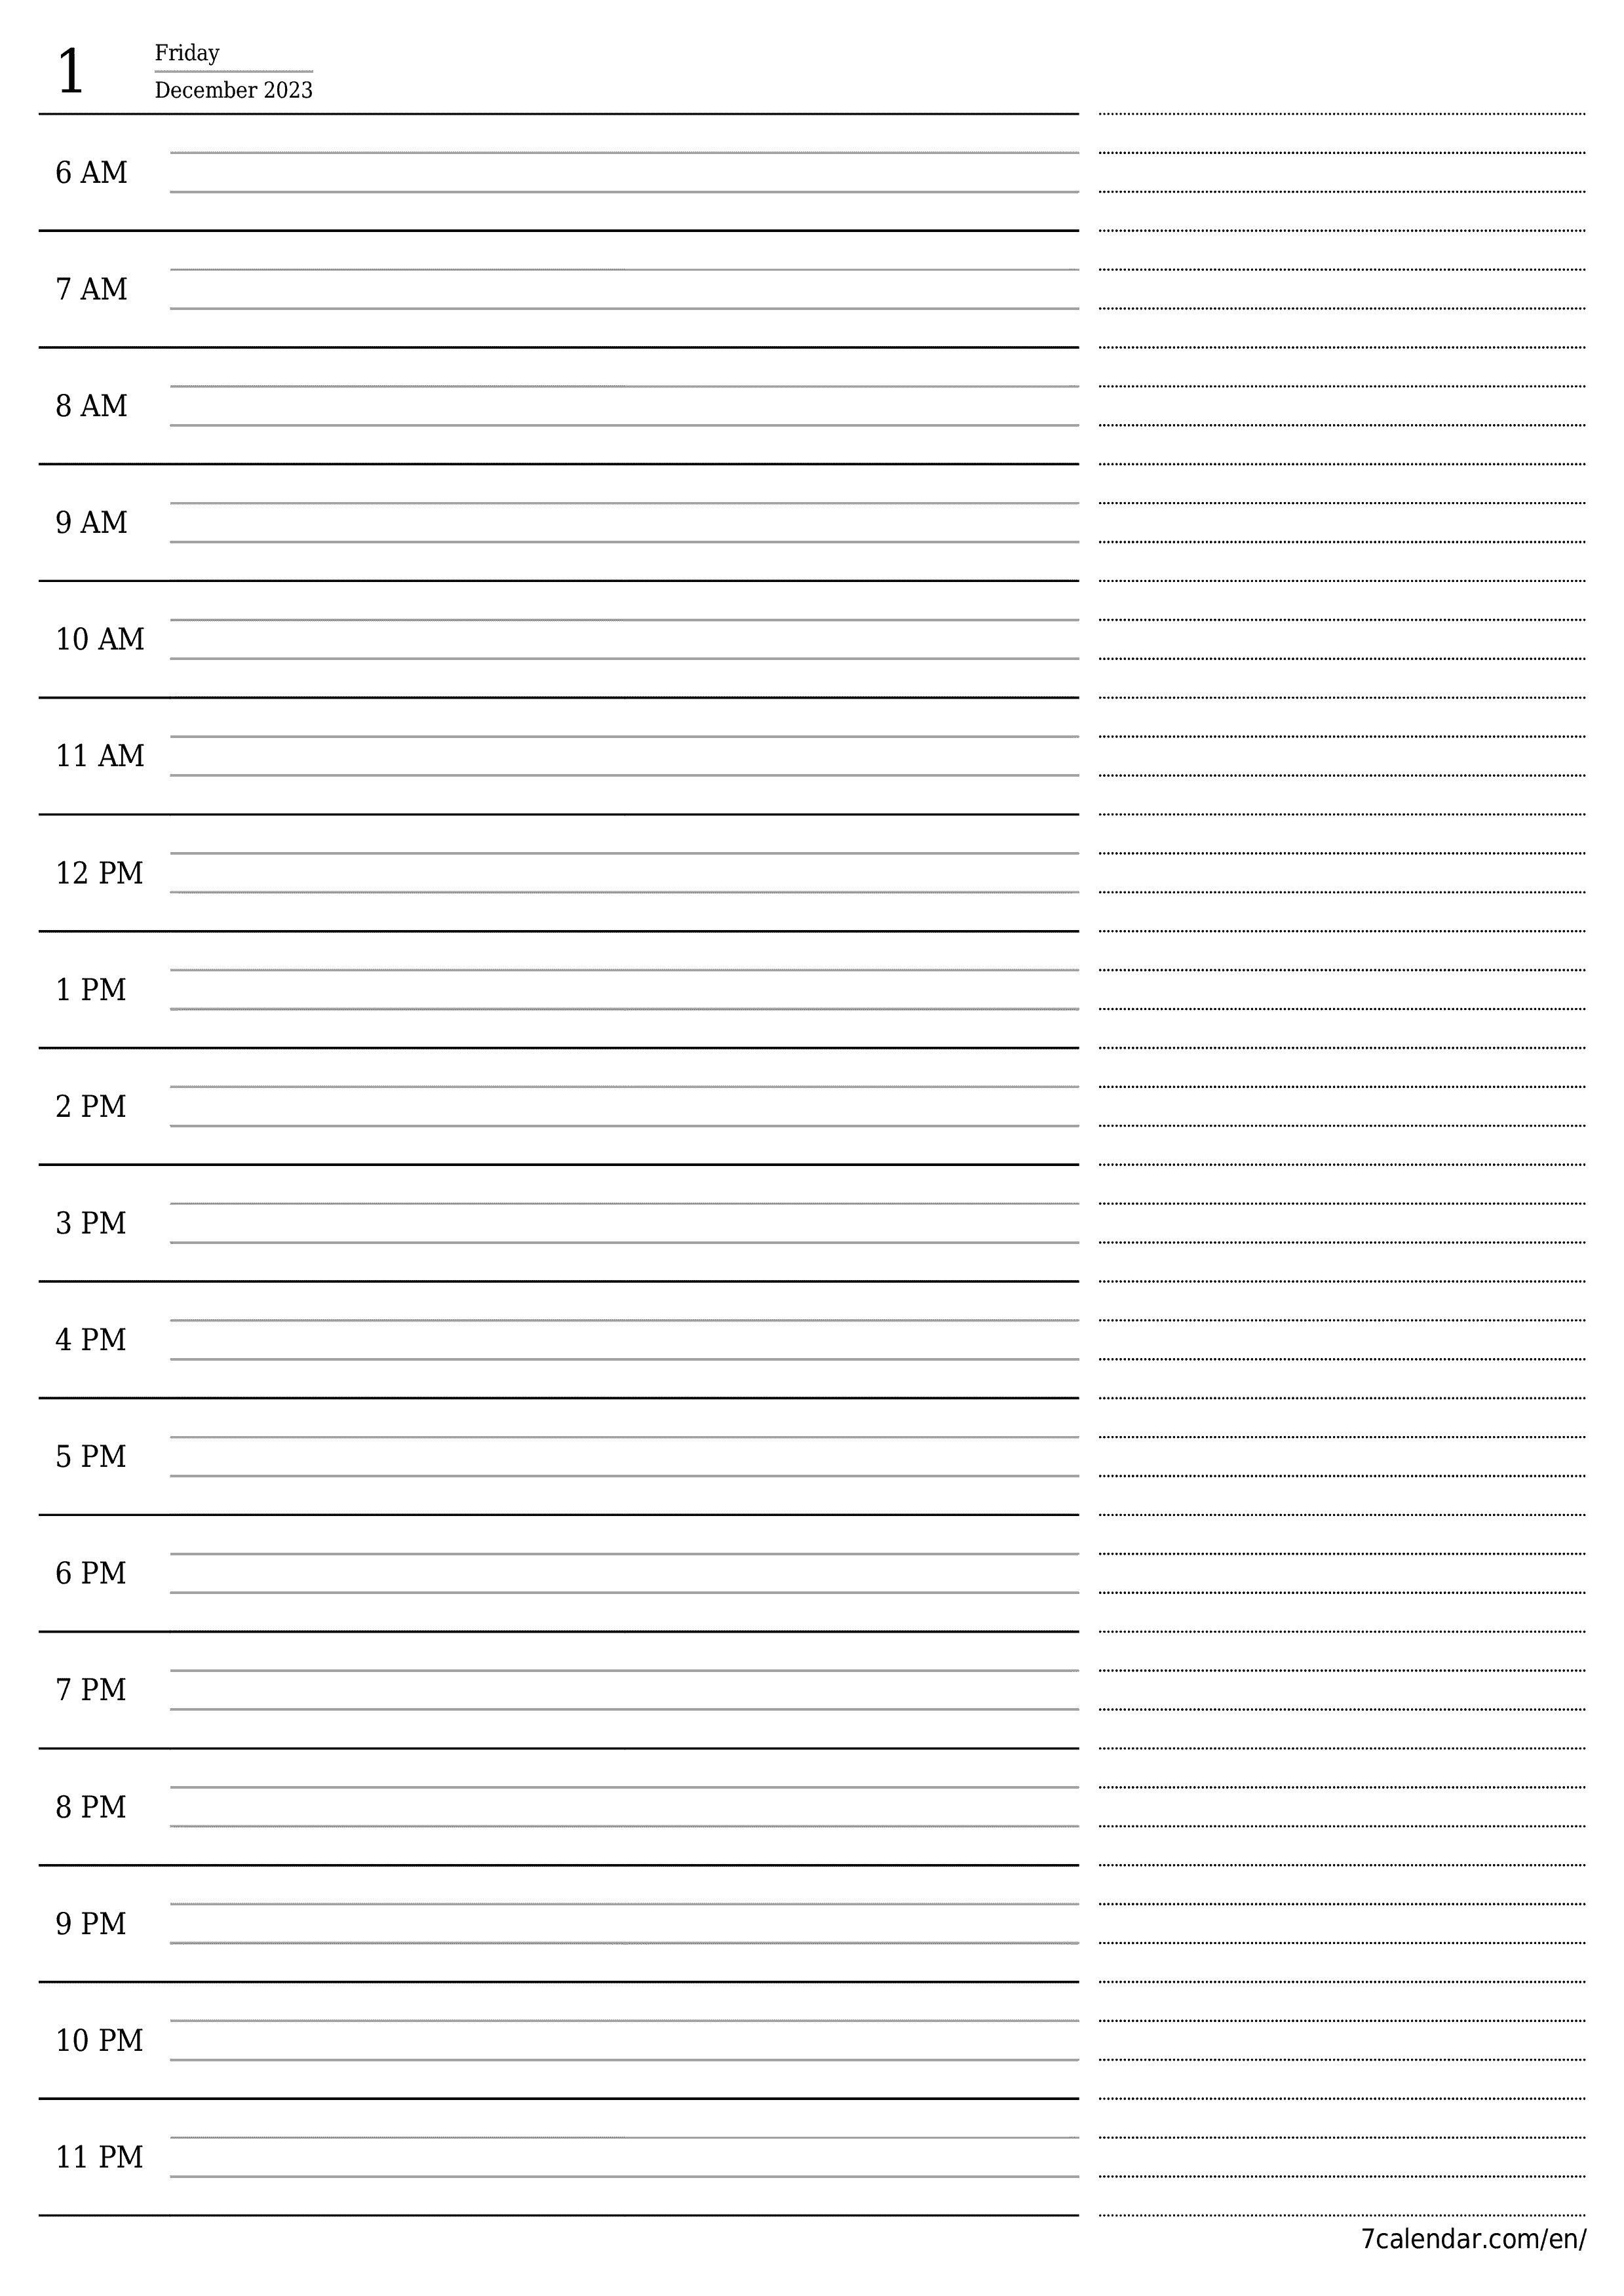 Blank daily printable calendar and planner for day December 2023 with notes, save and print to PDF PNG English